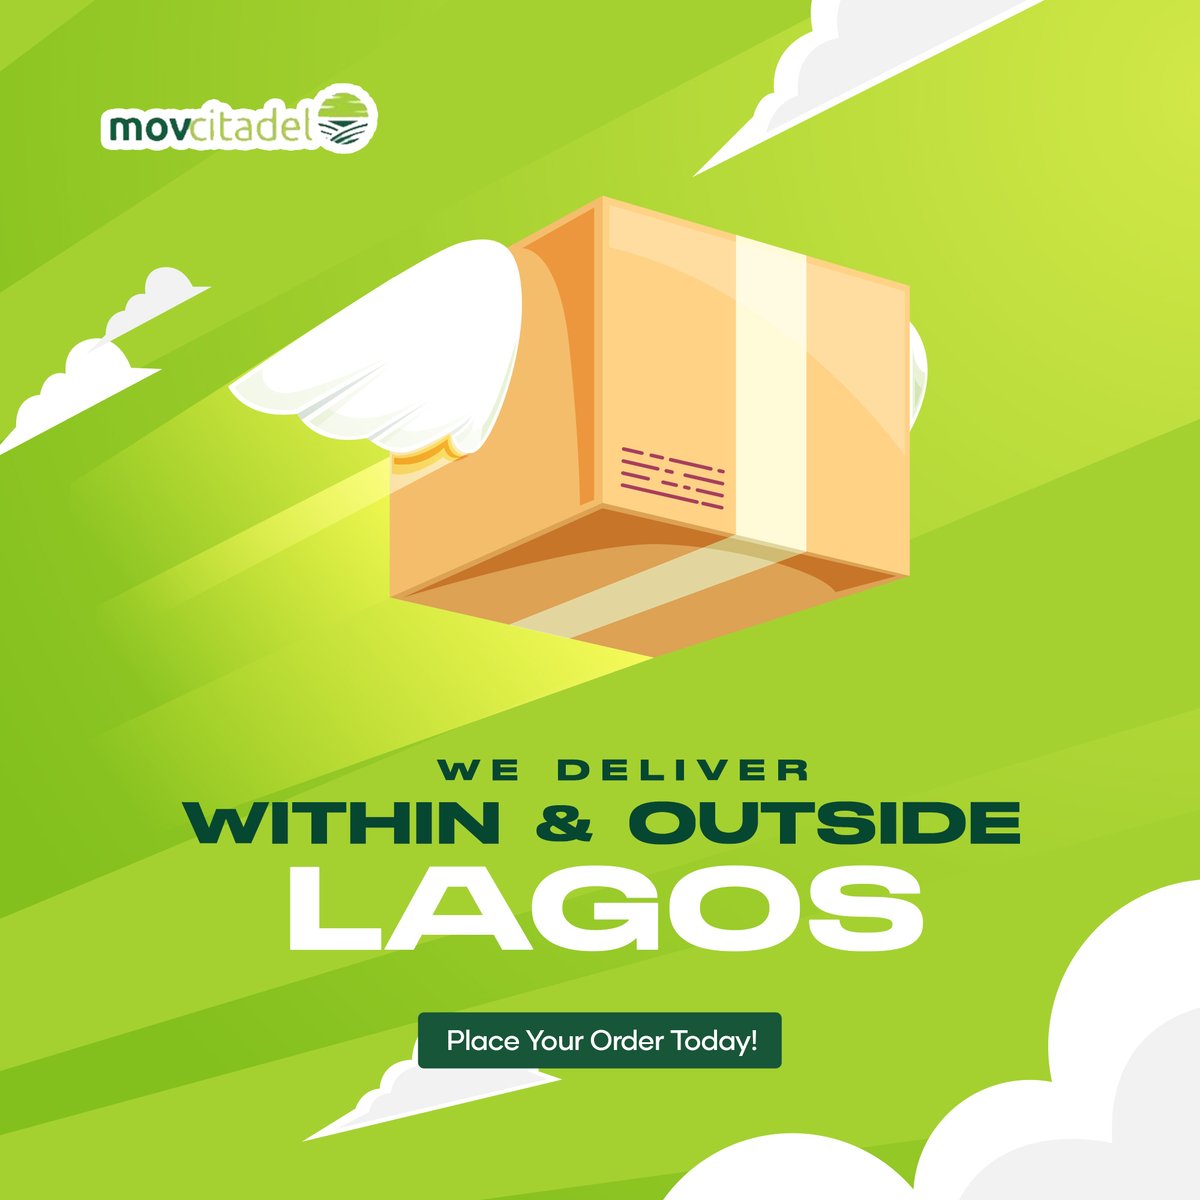 Just so you know, we do deliveries within and outside Lagos State🚛 Place Your Orders Today😊 
.
Visit our website and browse through our wide range of food items at the best prices 😊
.
#movcitadel #fooditems #onlinestorelagos #onlinestore #shoponline #fooditems #deliveries